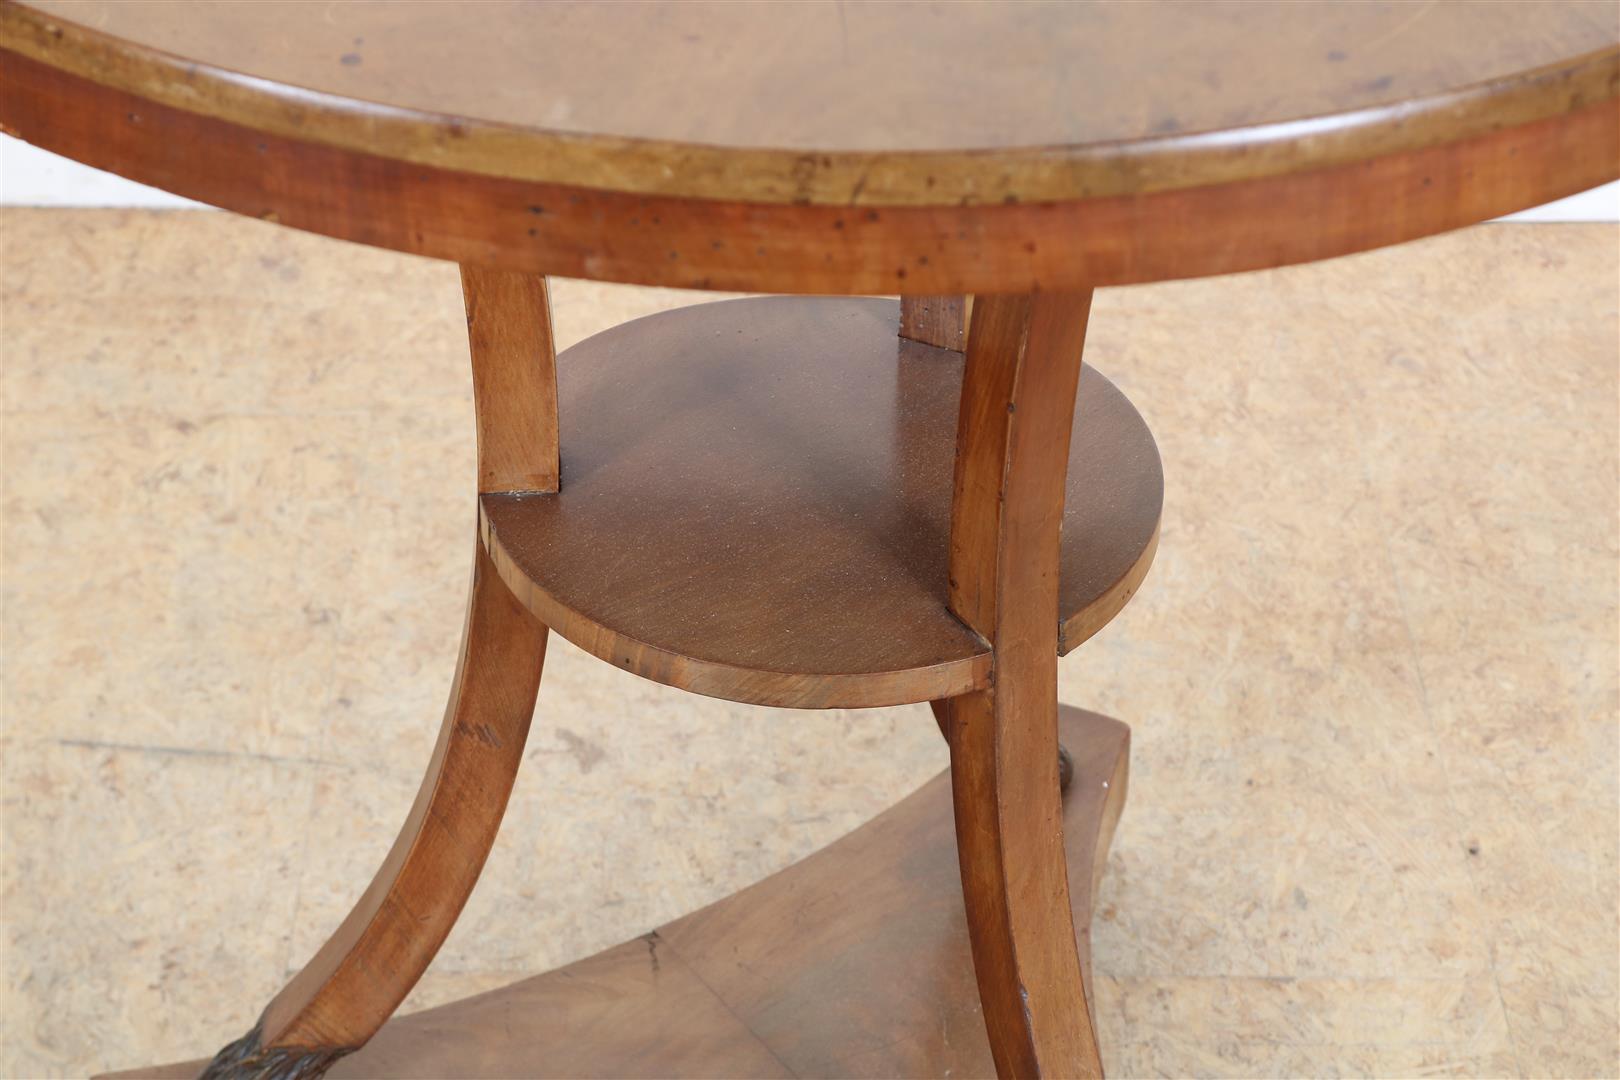 Mahogany side table with shelf on sabre-shaped legs ending in deer legs, 19th century, 76 x 80 cm. - Image 3 of 5